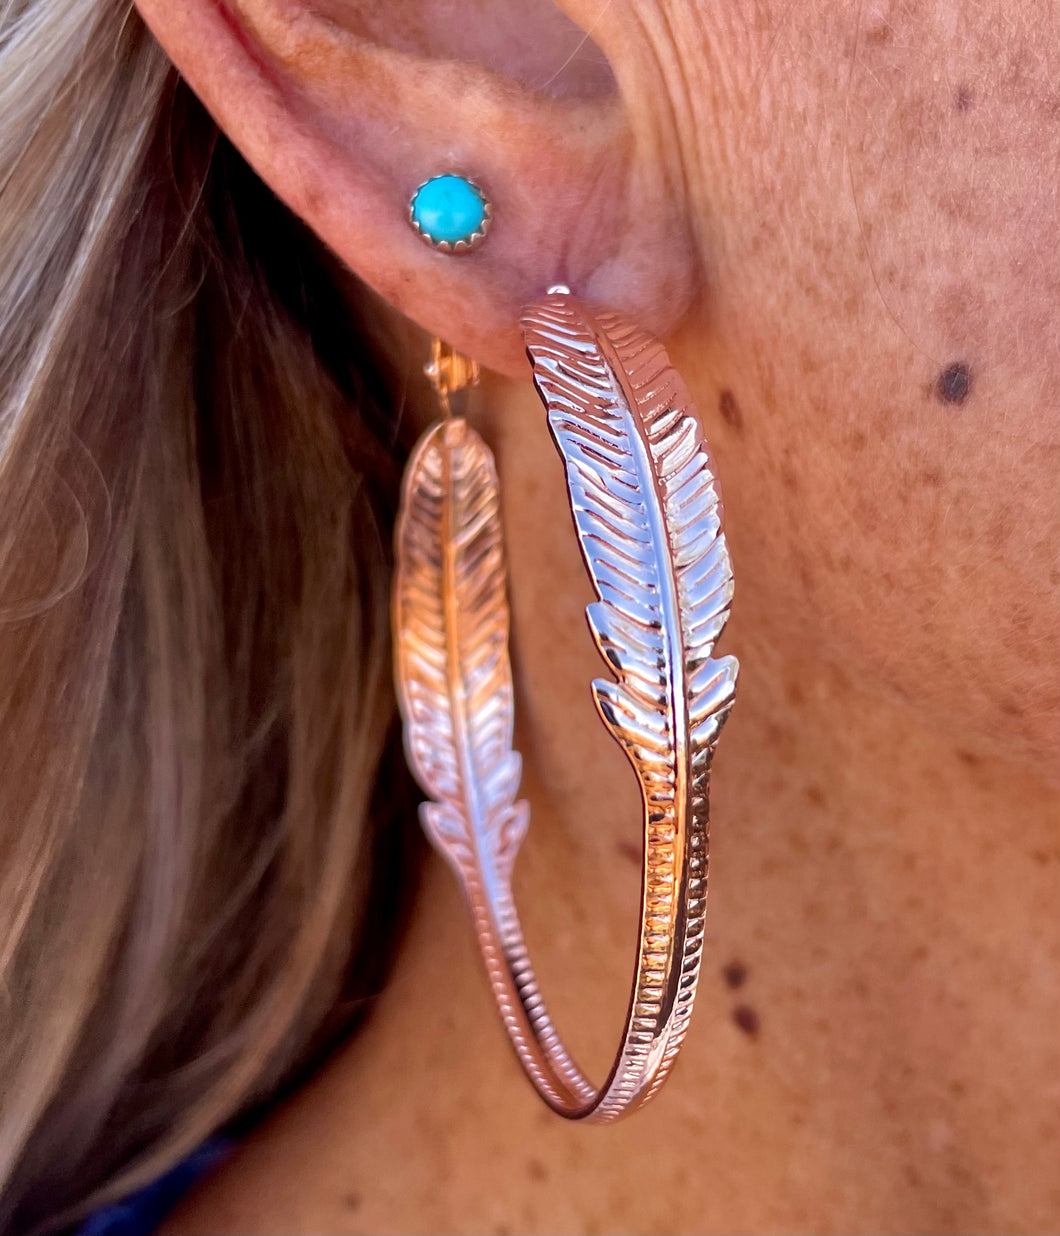 Feathered Together earrings